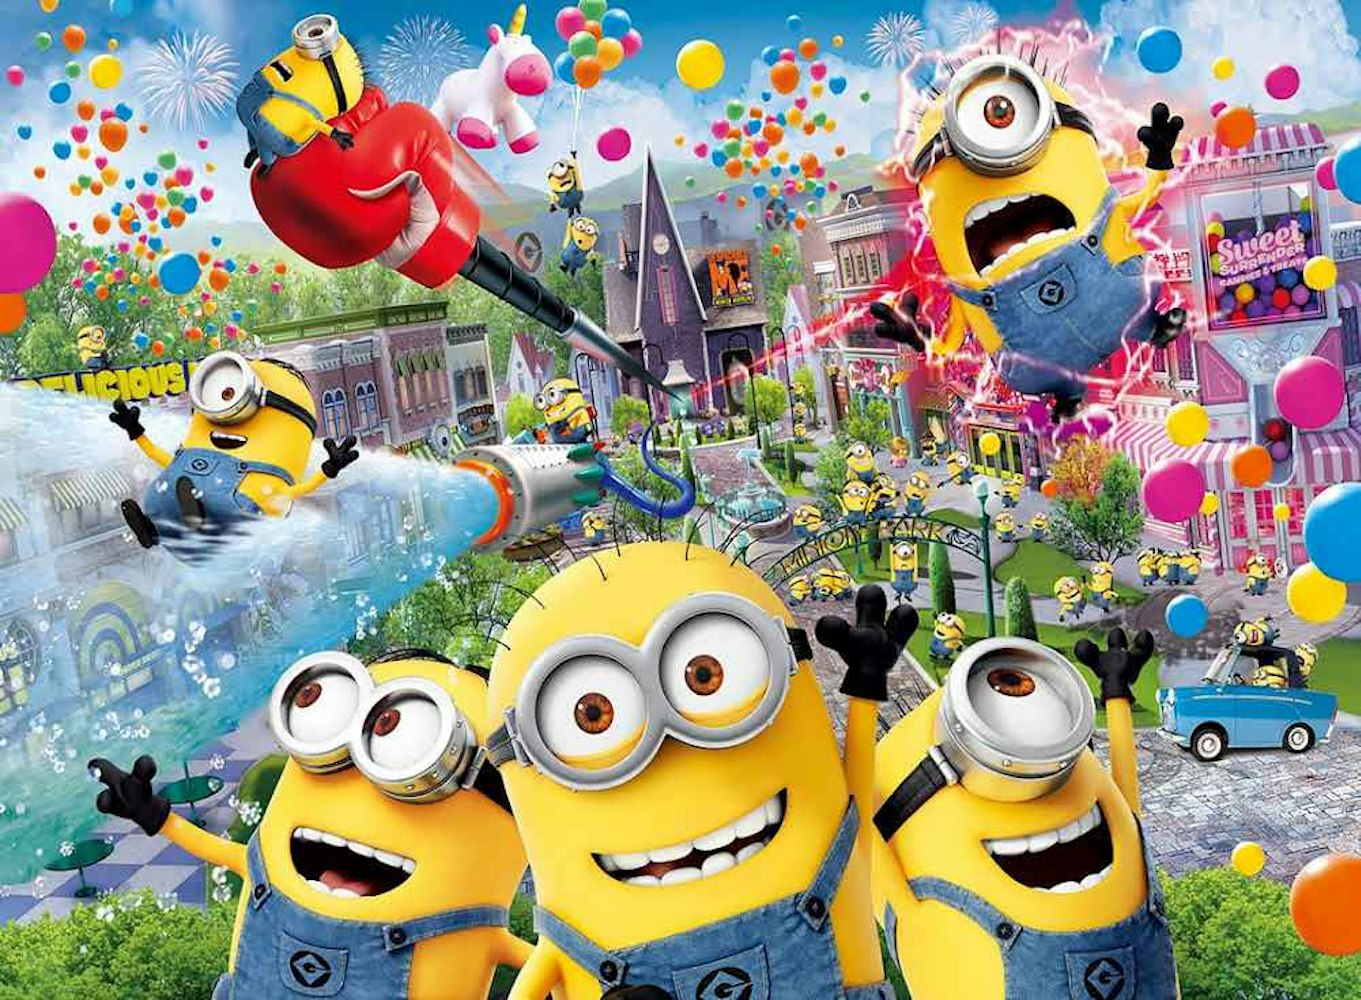 Cover Image for Universal Announces Official Opening Date for Minion Land 2023